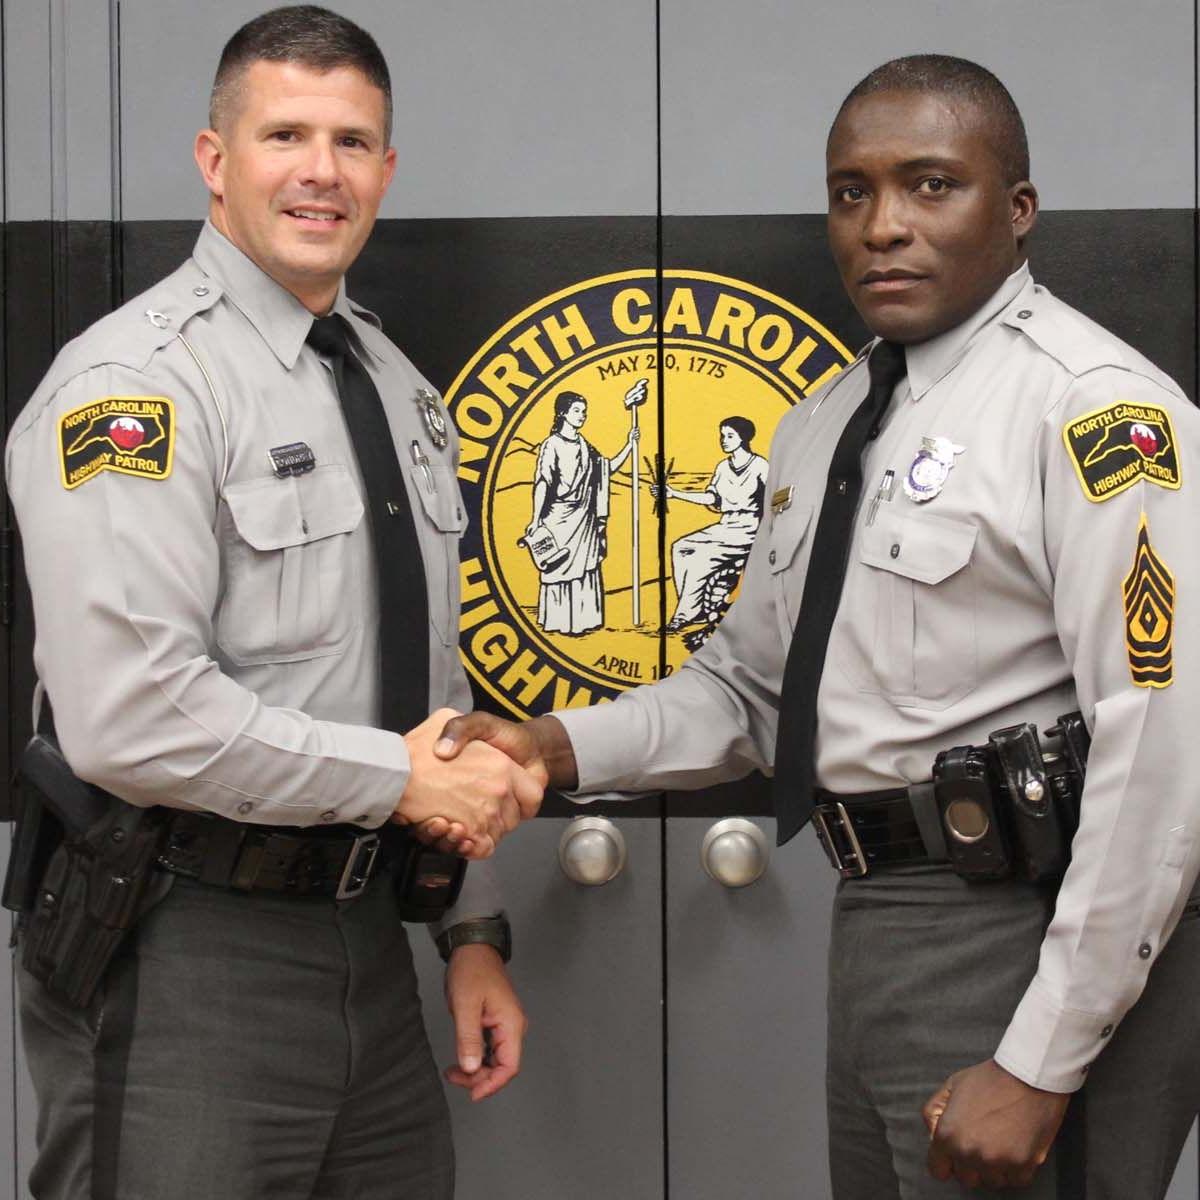 District Highway Patrol First Sgt. retires after 25 years